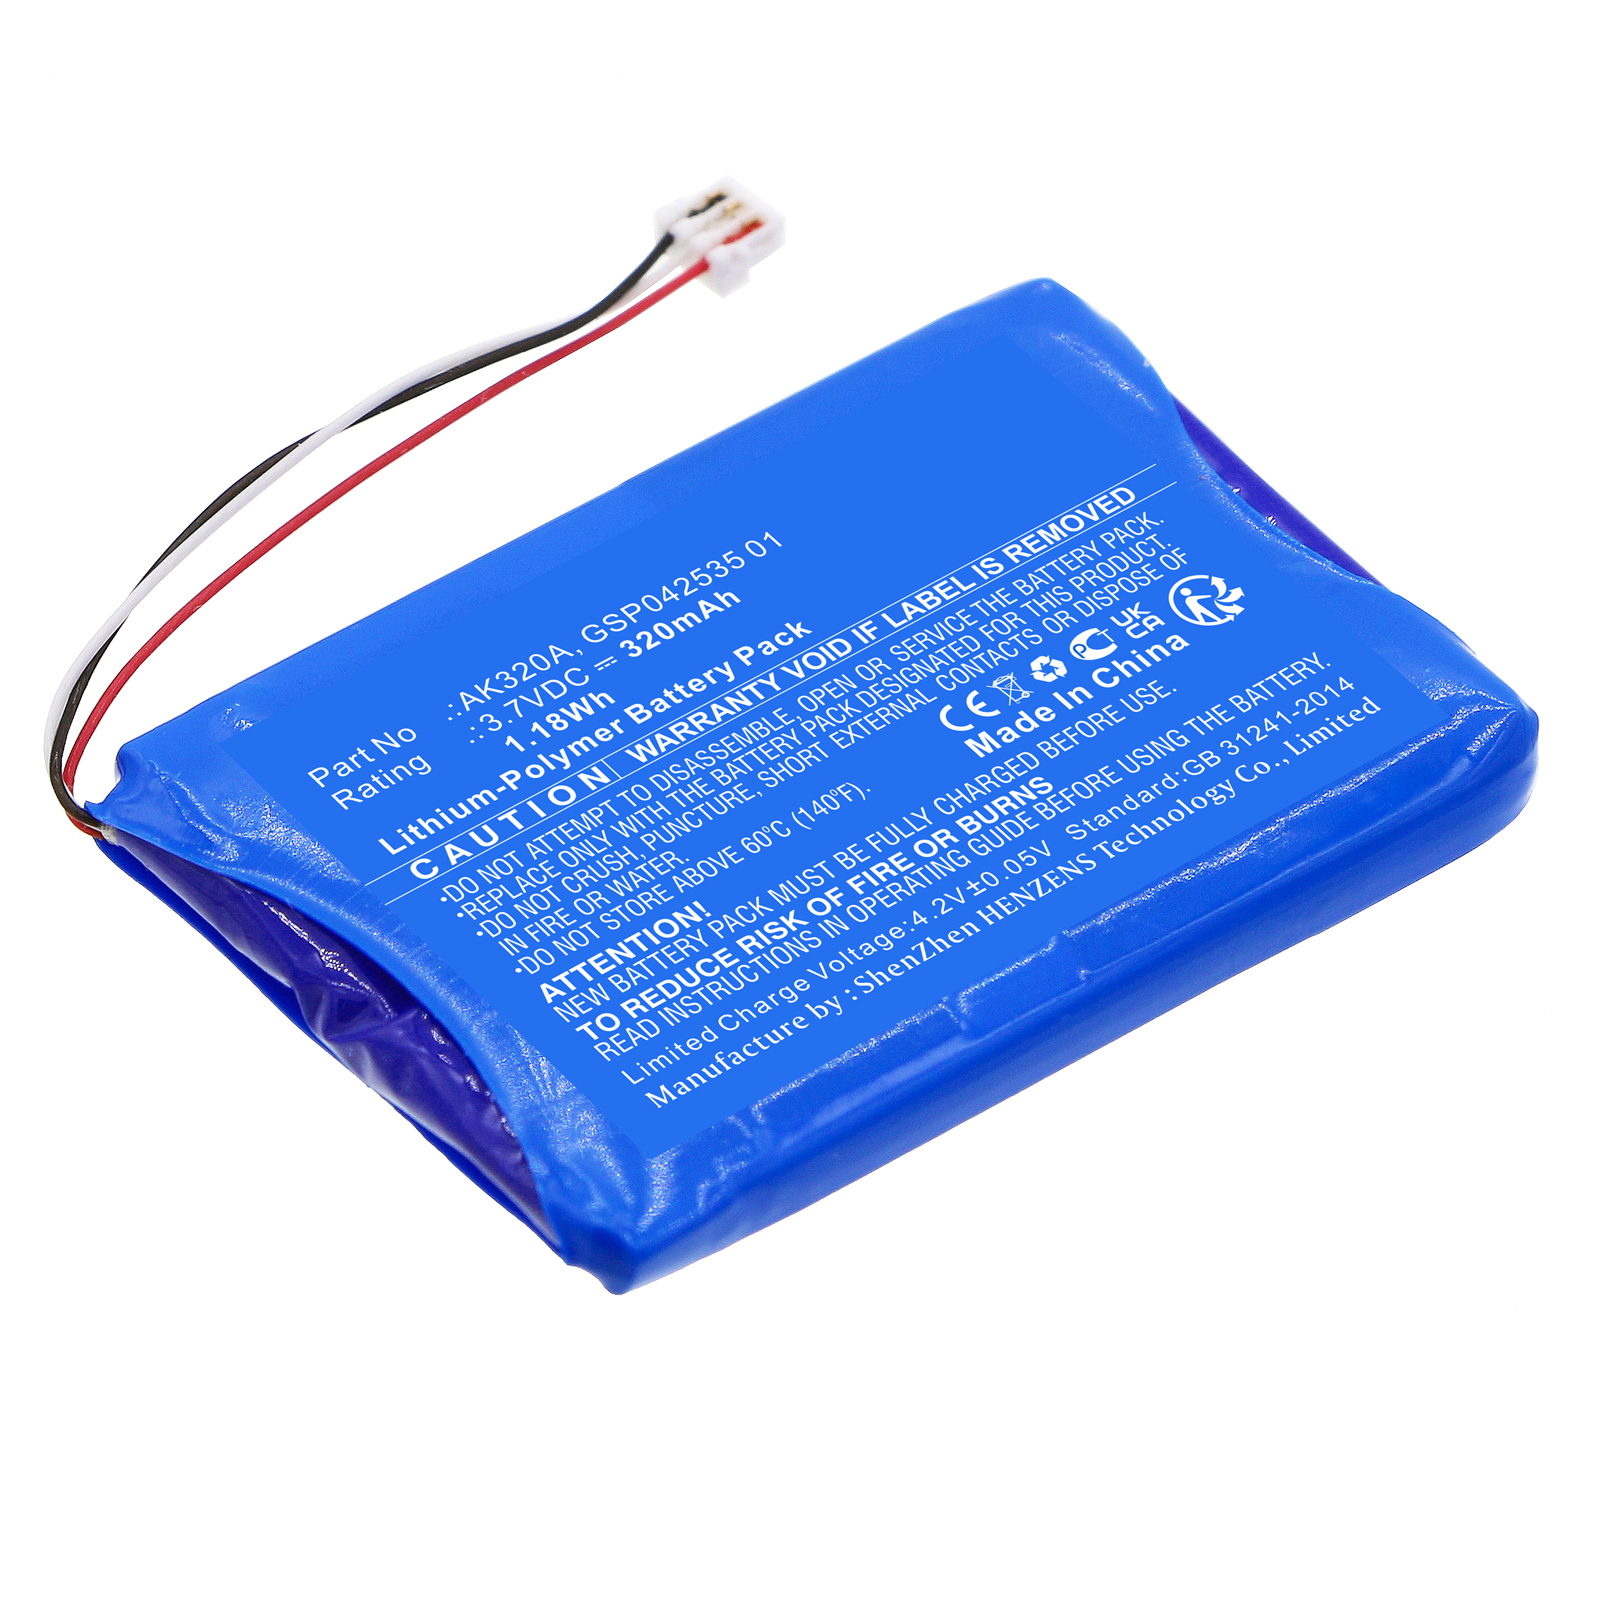 Batteries for SnomWireless Headset